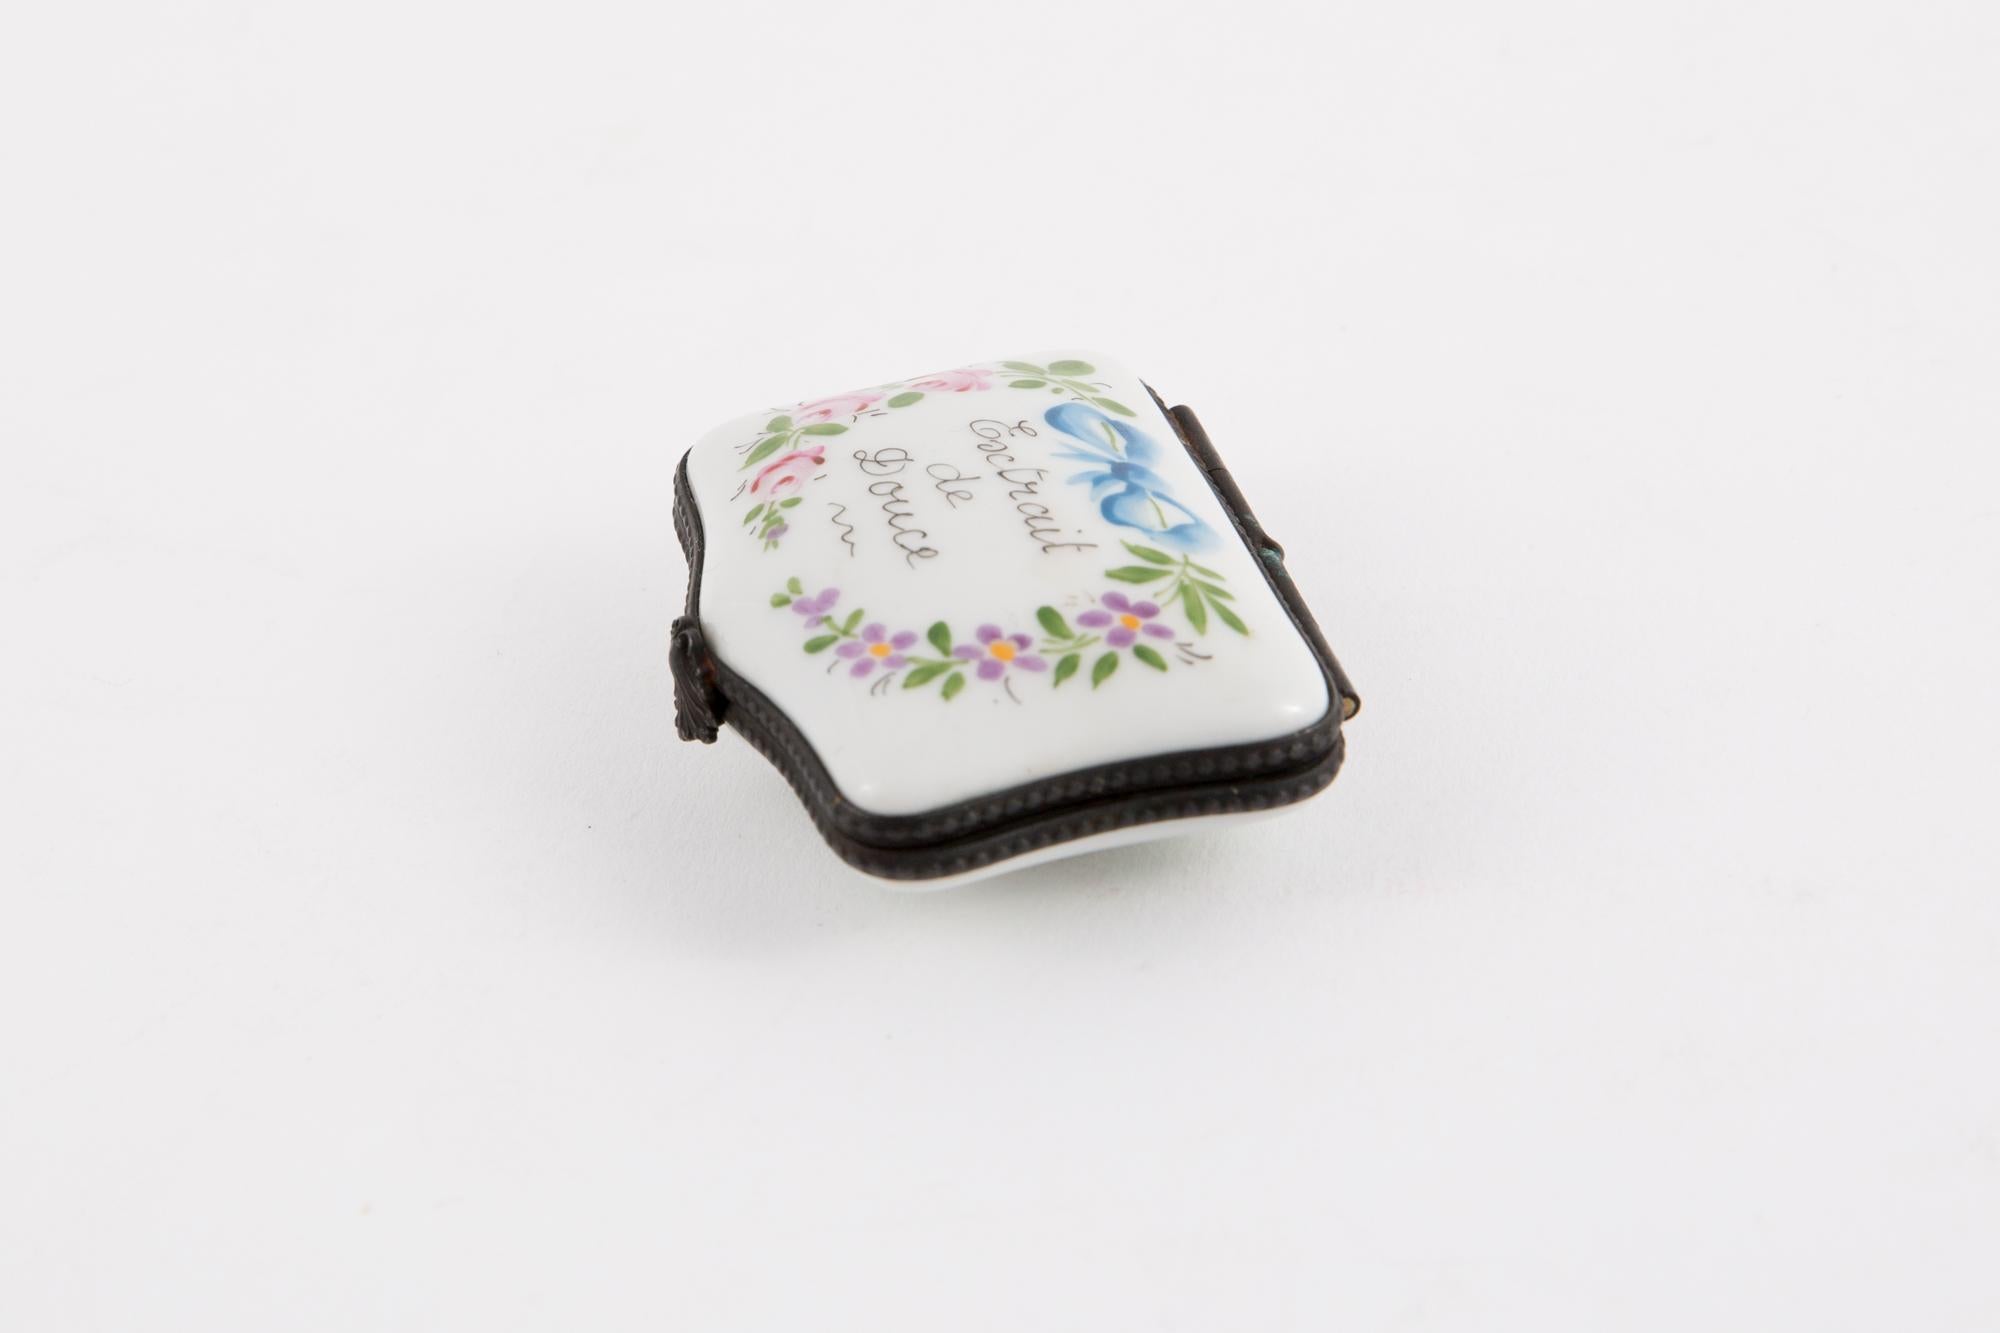 Porcelain Extrait de Douce (soft extract) polychrome pill box featuring a metal frame, a flower claps, leaves painted inside and a polychrome floral decor and text. 
Hand Painted
In good vintage condition. 
Width 1.5in. (4cm)
Length 2.3in. (6cm)
We